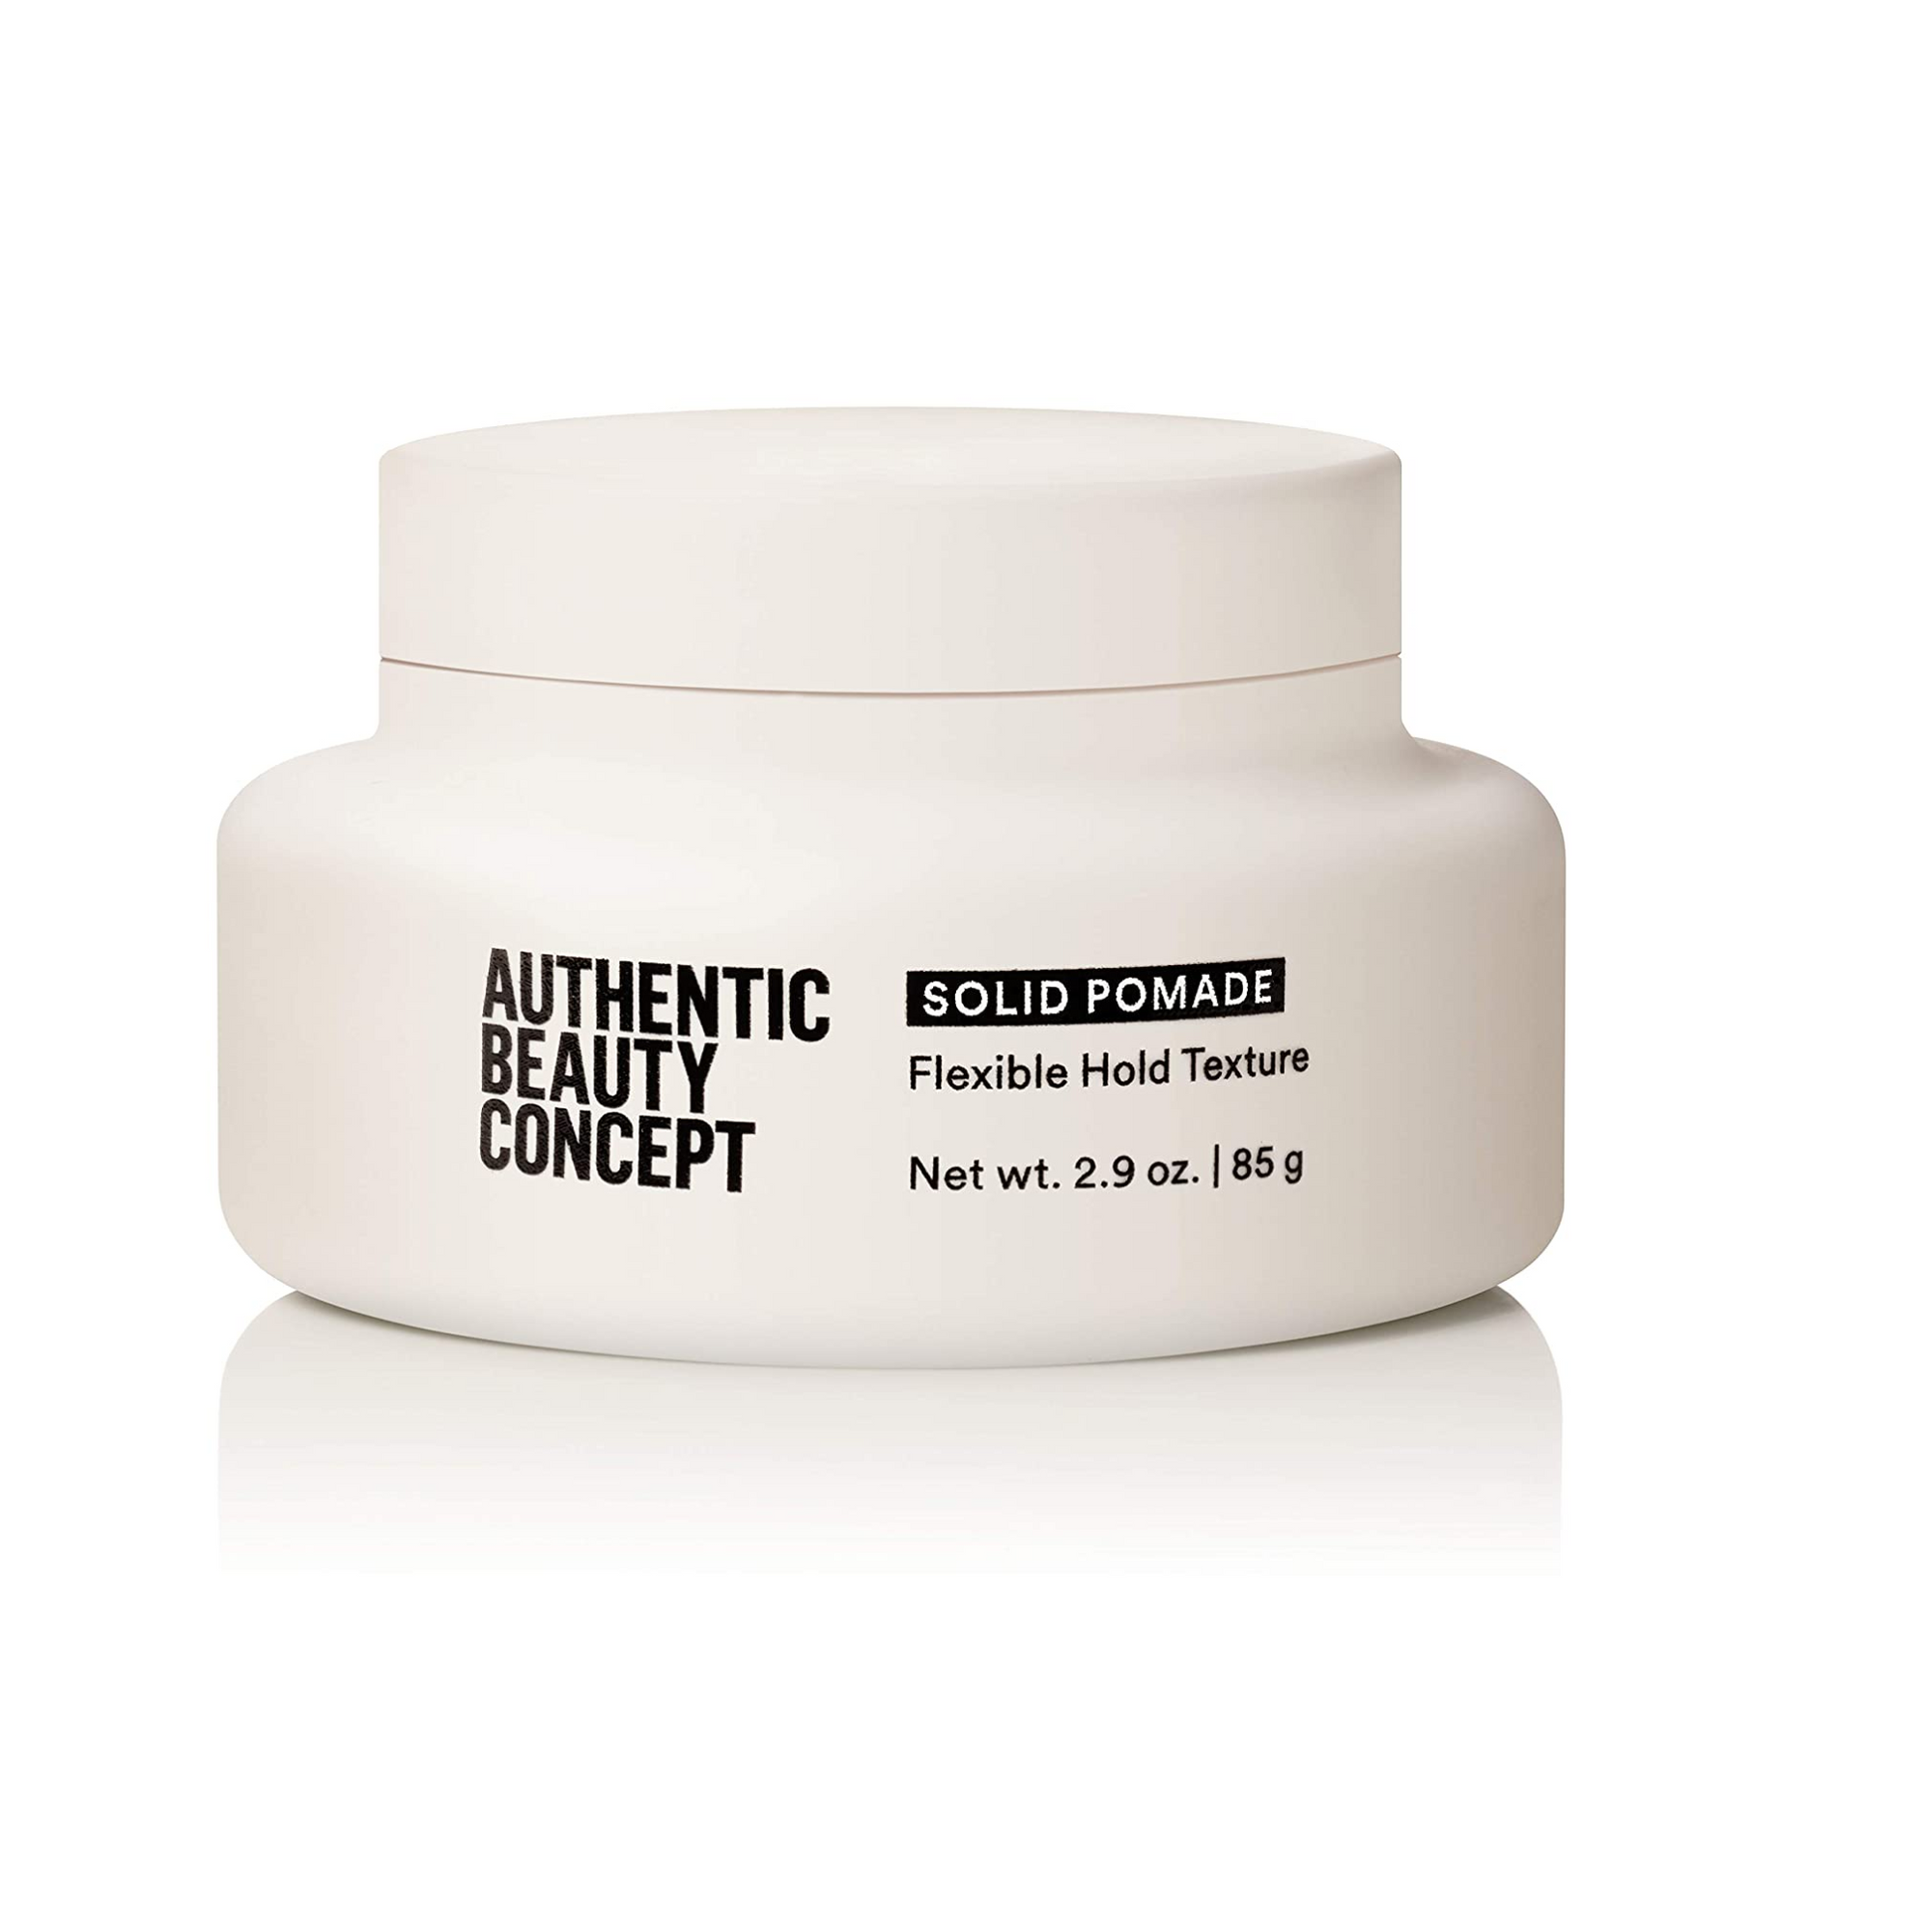 Authentic Beauty Concept Solid Pomade / 3OZ